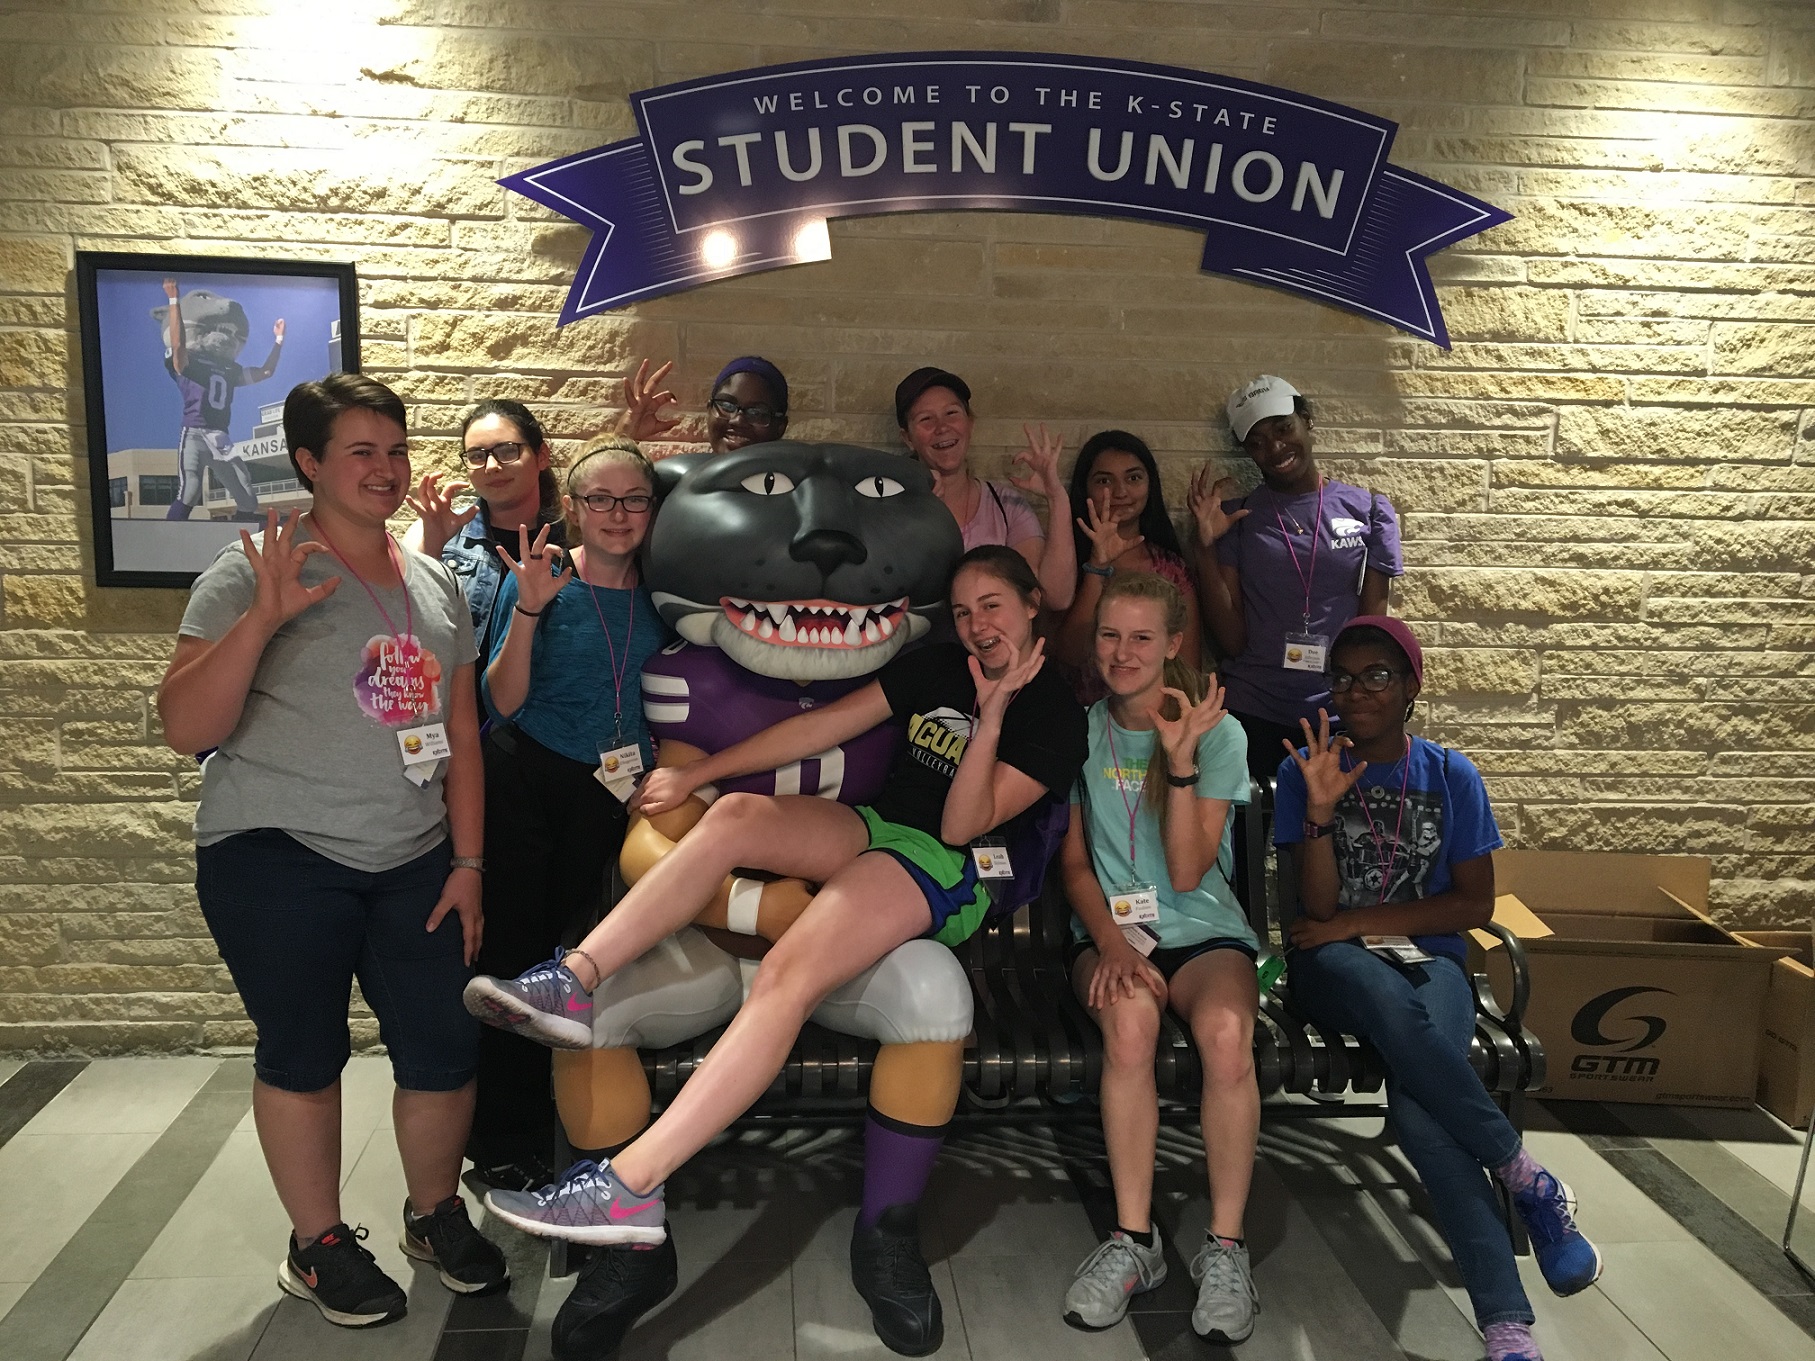 EXCITE students posing with Willie the Wildcat